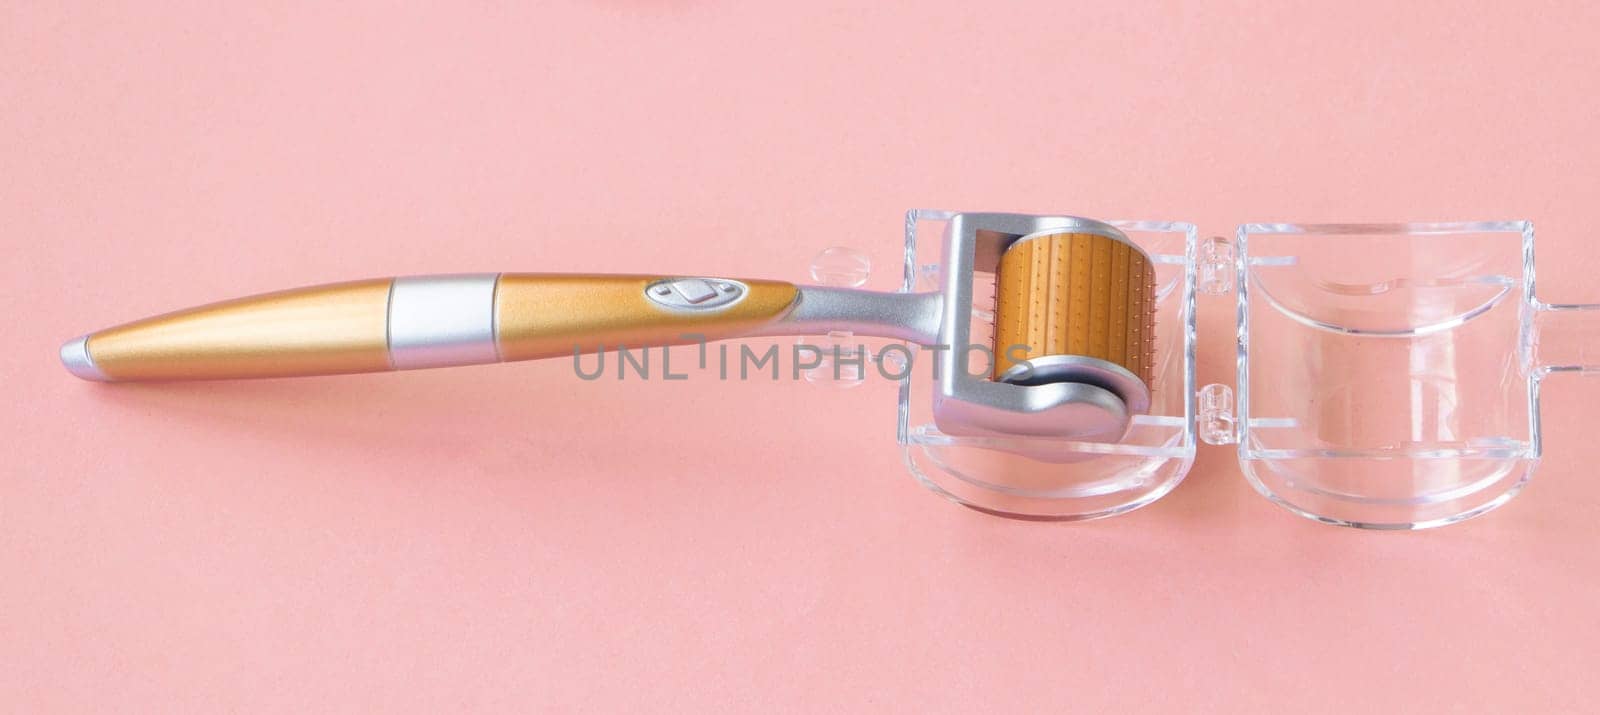 Derma Roller Micro Needle Cosmetic Microdermabrasion Tool For Face.The concept of facial rejuvenation procedures . High quality photo